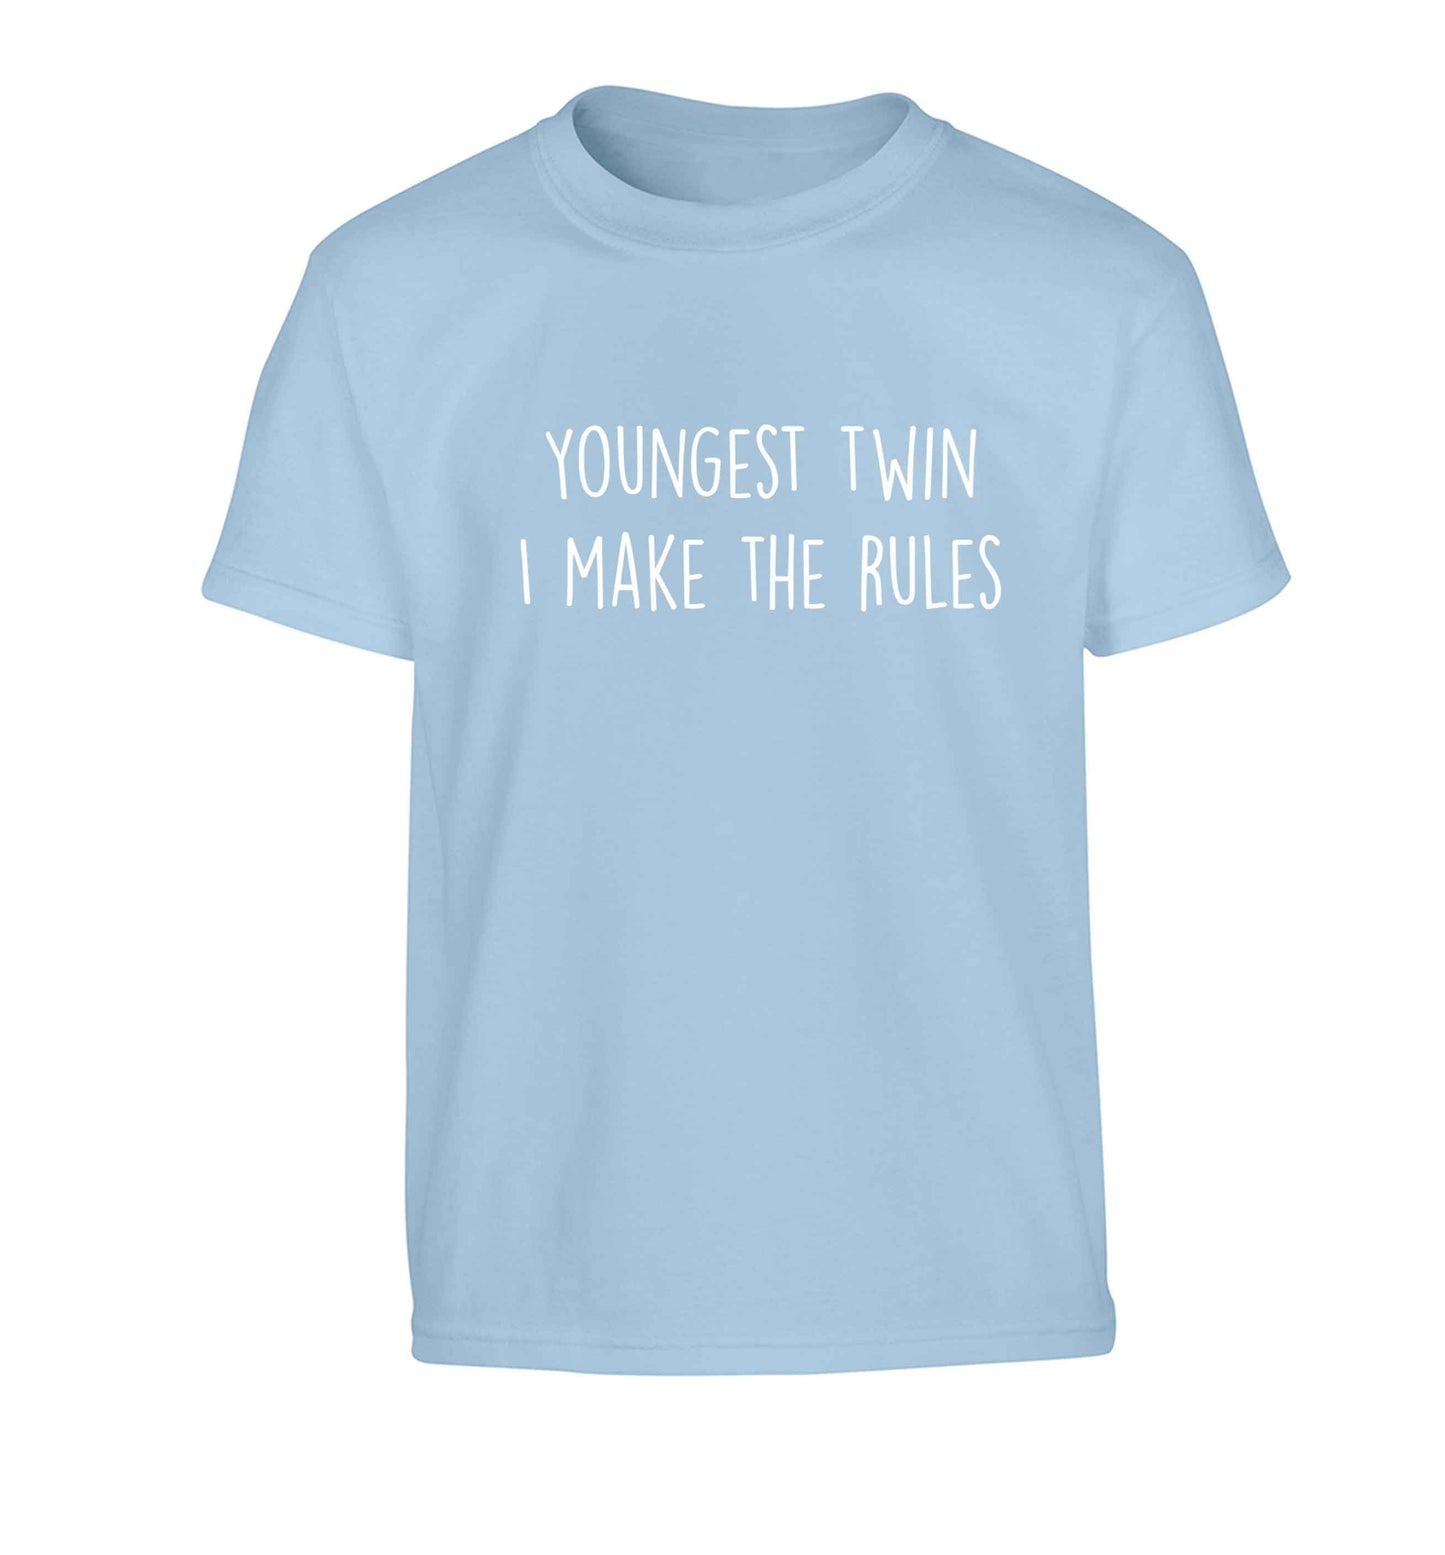 Youngest twin I make the rules Children's light blue Tshirt 12-13 Years